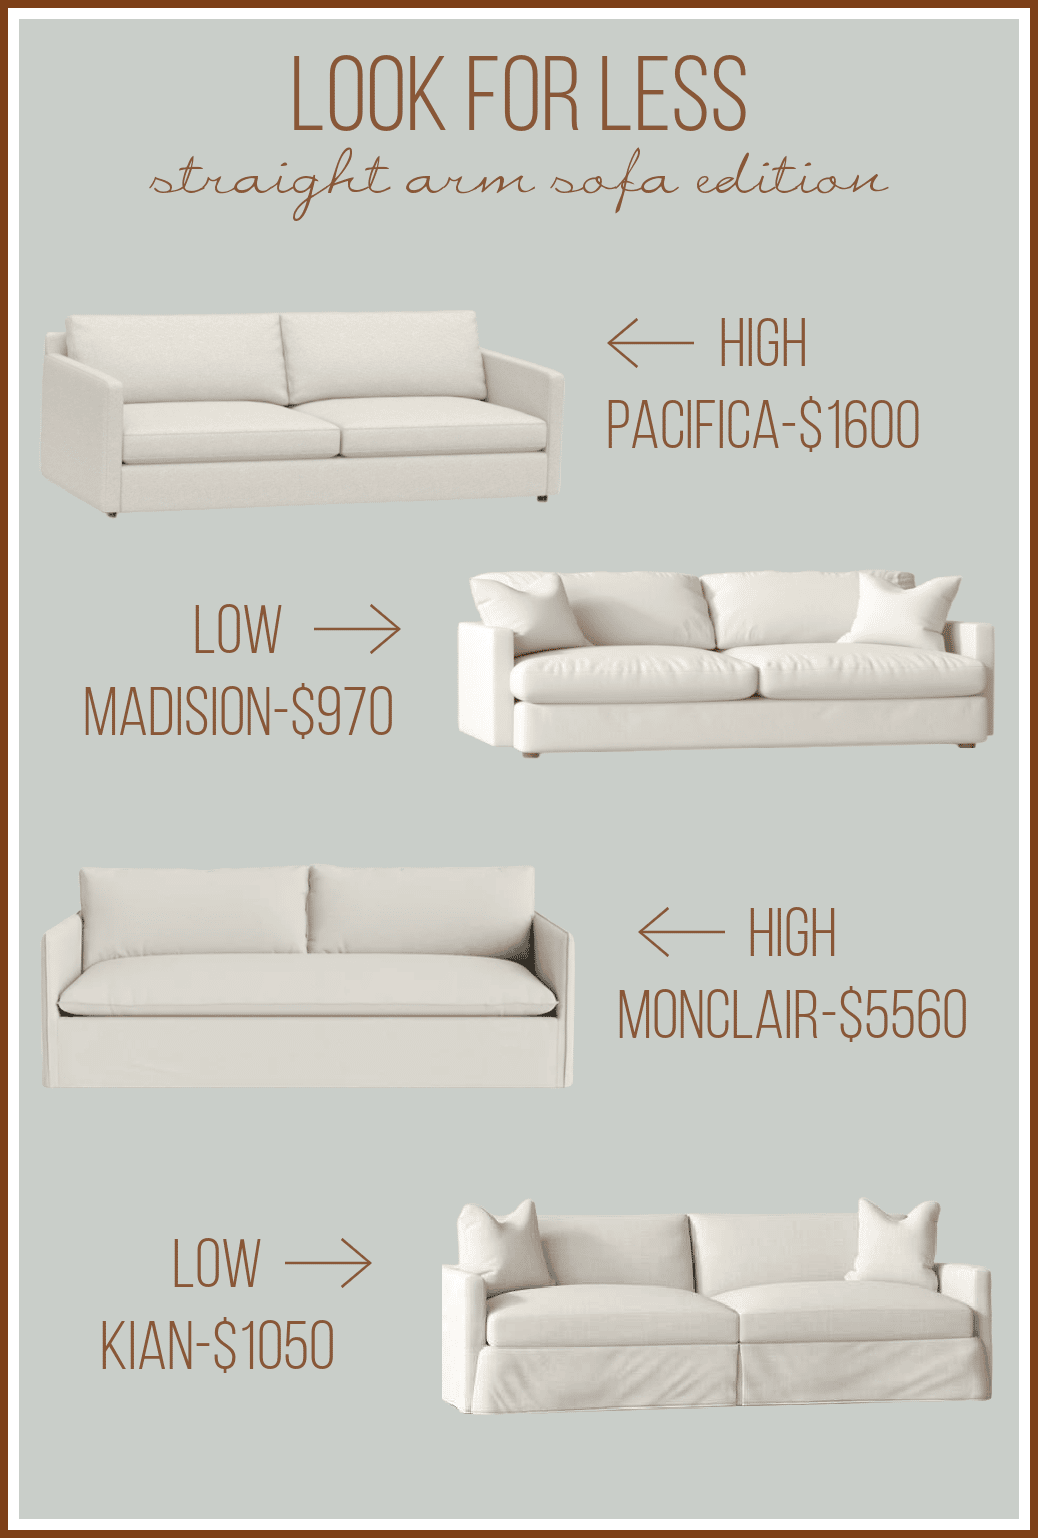 Look for Less-The Straight Arm Sofa